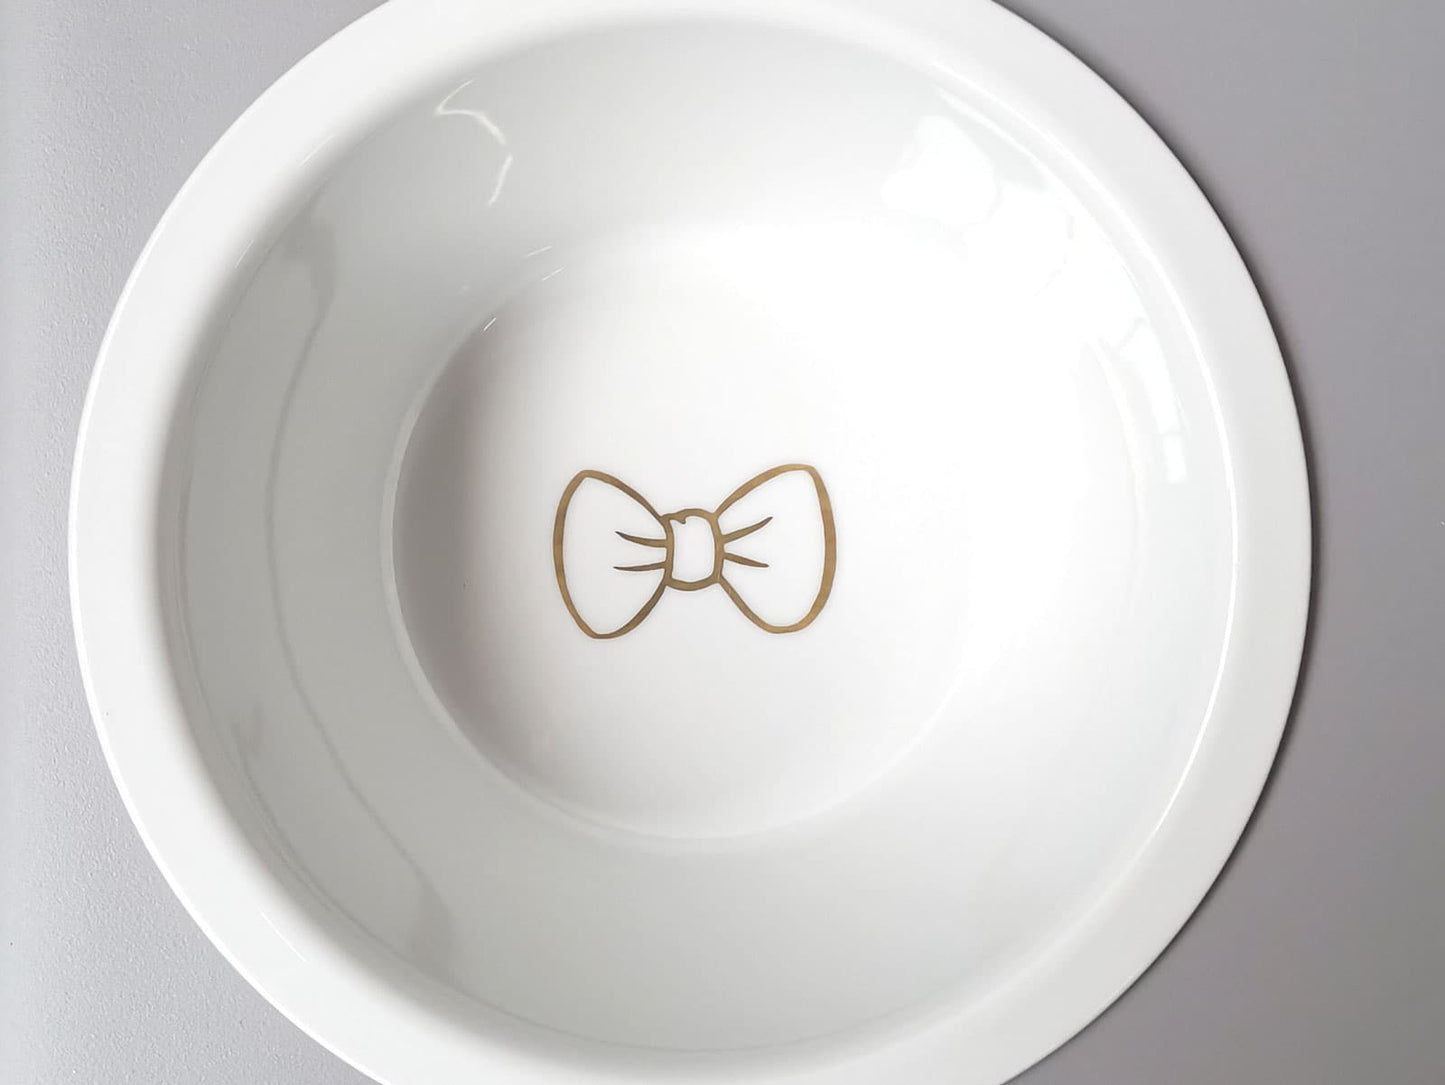 Personalization surcharge for a dogBar® M or M-small porcelain bowl